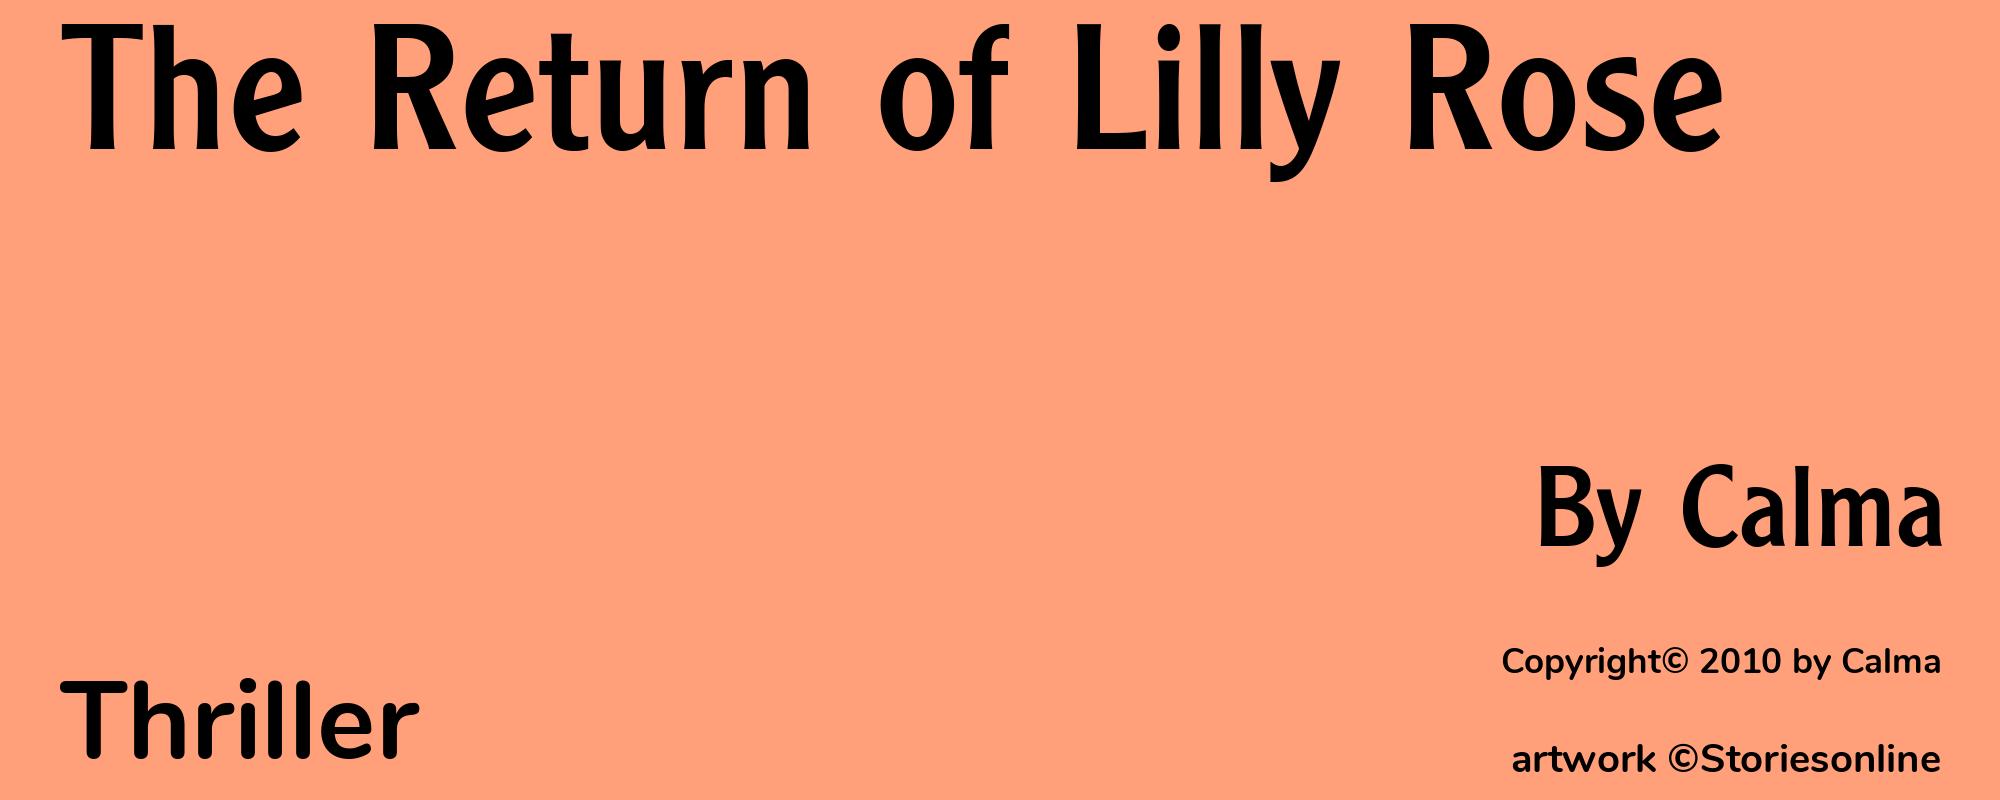 The Return of Lilly Rose - Cover